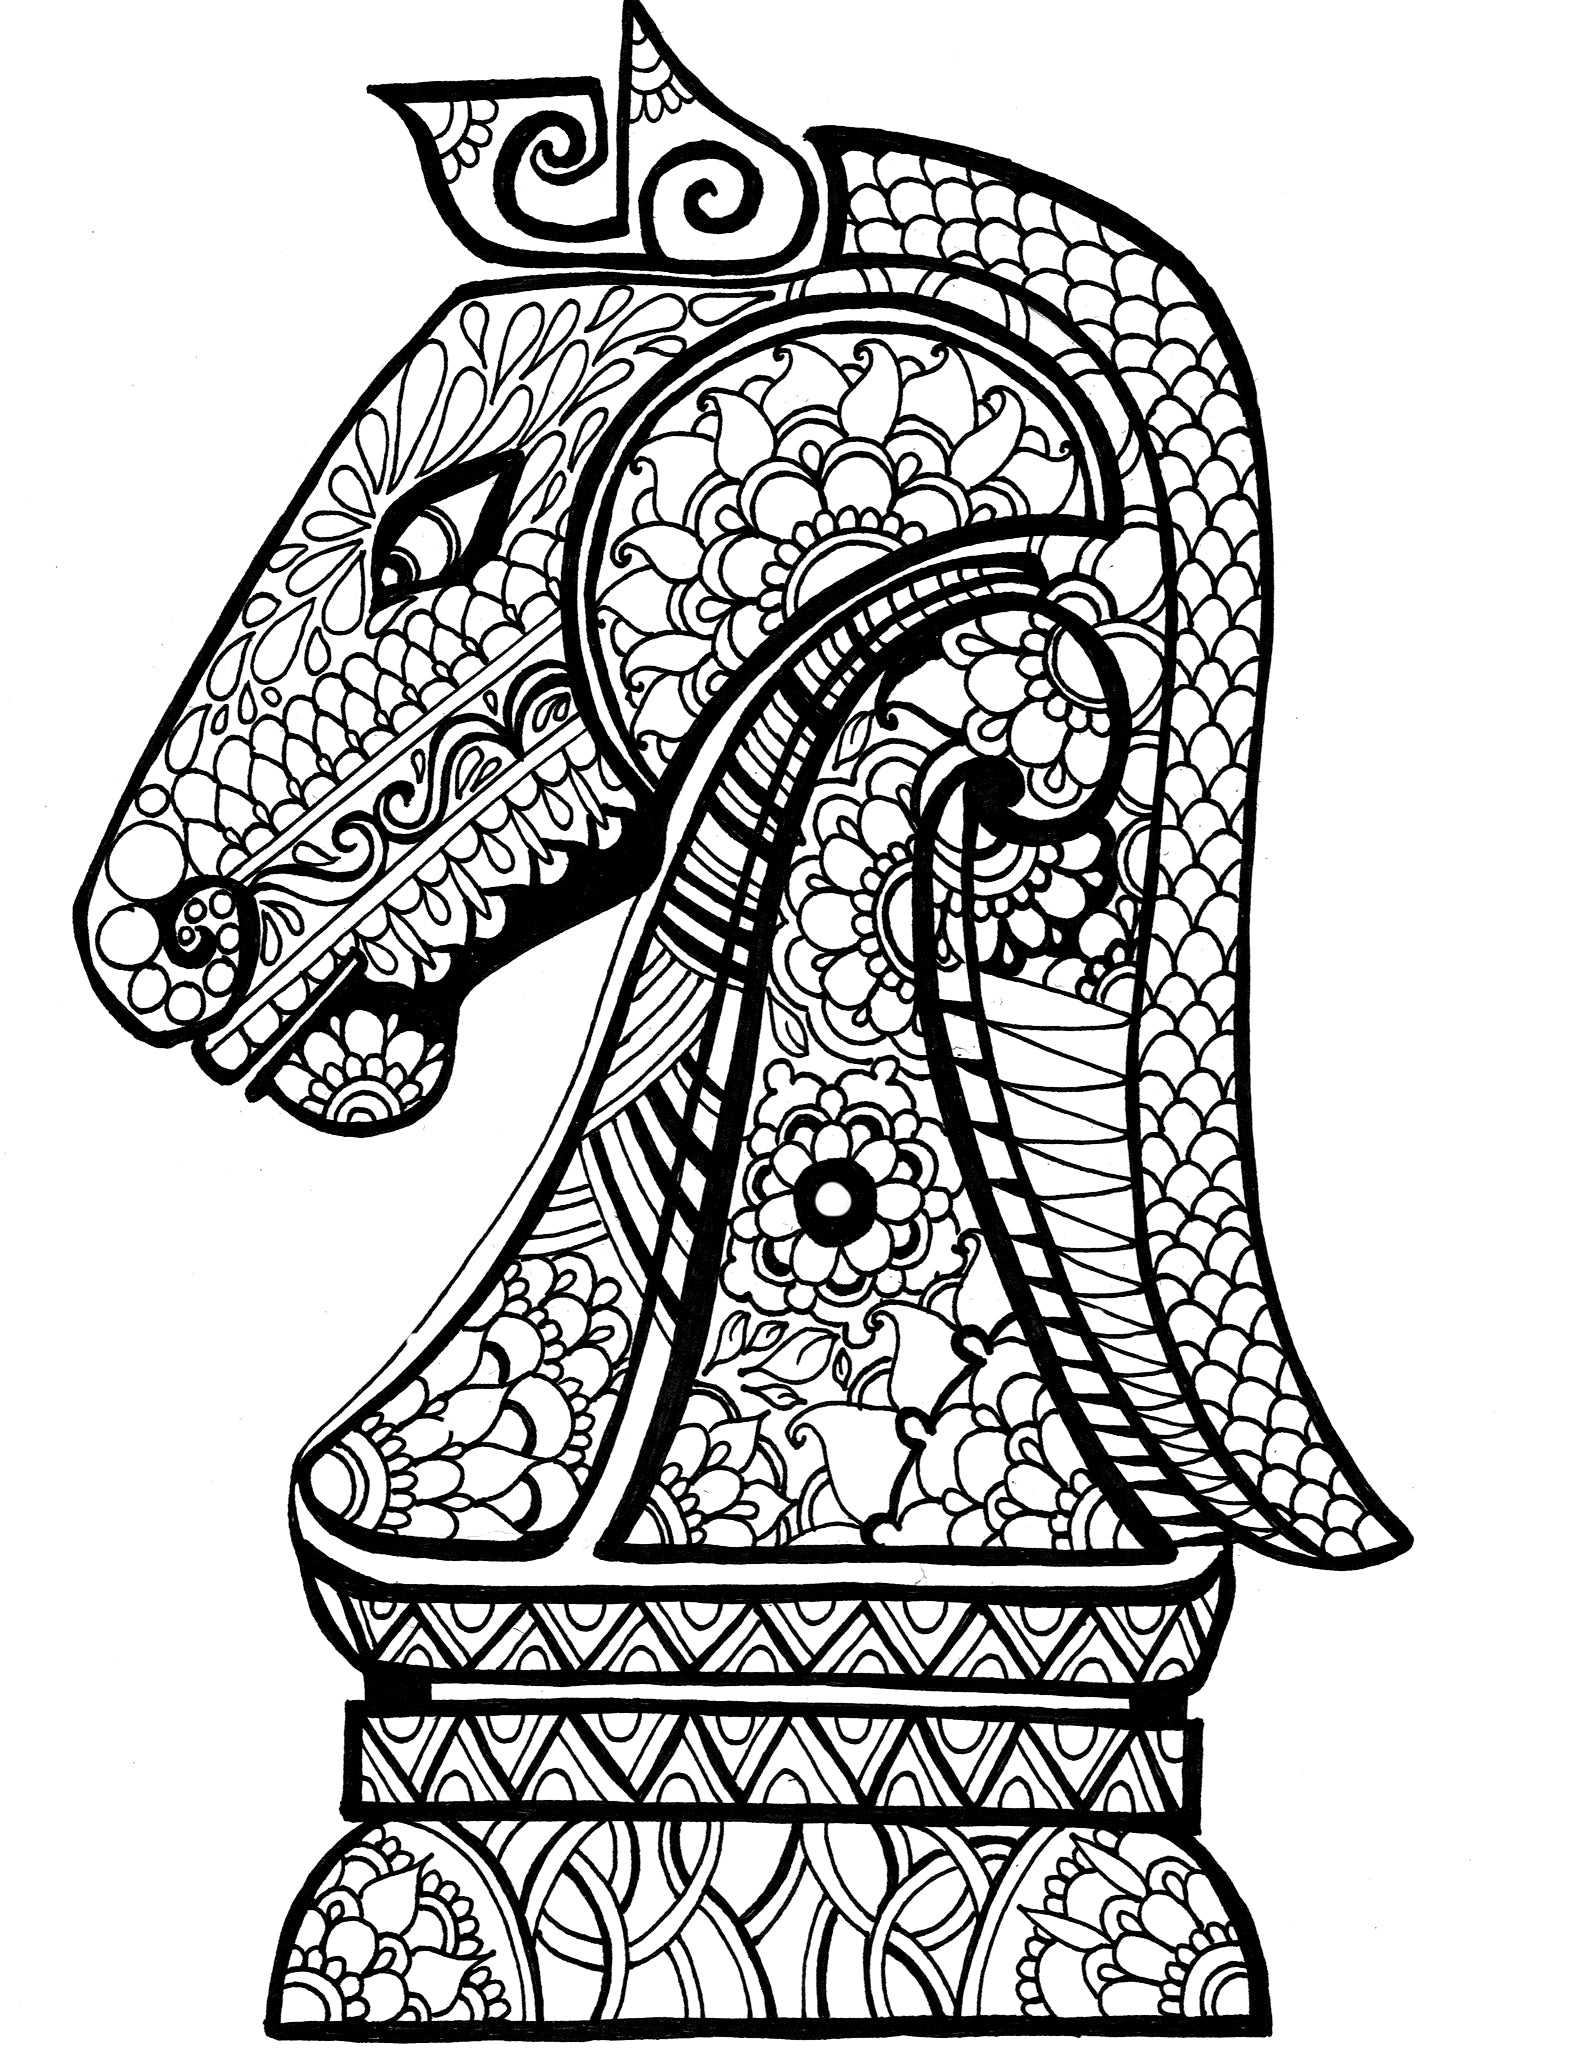 Black and white coloring page featuring a stylized knight chess piece, embellished with intricate floral and paisley patterns. The knight, traditionally represented by a horse's head, is adorned with elaborate designs that evoke a sense of nobility and strategy associated with the game of chess. The artwork invites colorists to infuse creativity into the game's dynamics, highlighting the knight's role as a versatile and valuable participant in the timeless dance of chess.Free coloring page :: YouColor